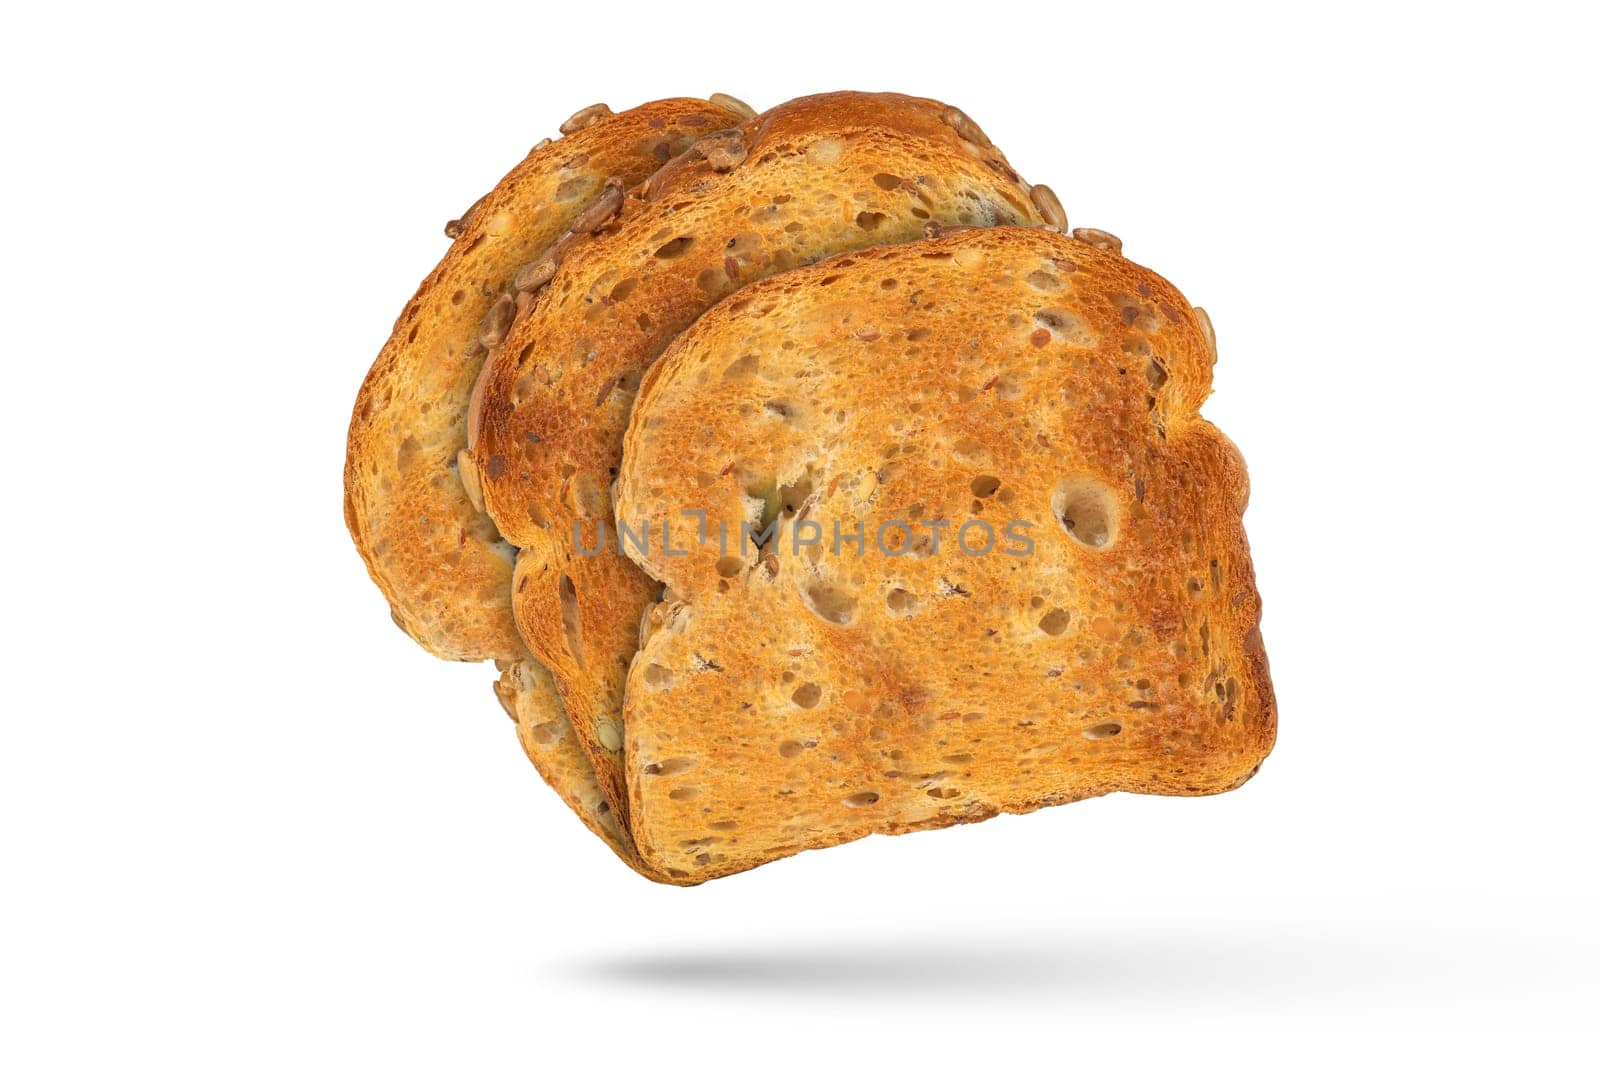 Isolate of three slices of toasted bread, for design or project. Toasted, golden, whole grain bread from a toaster, isolated on a white background. The concept of diet food or light breakfast